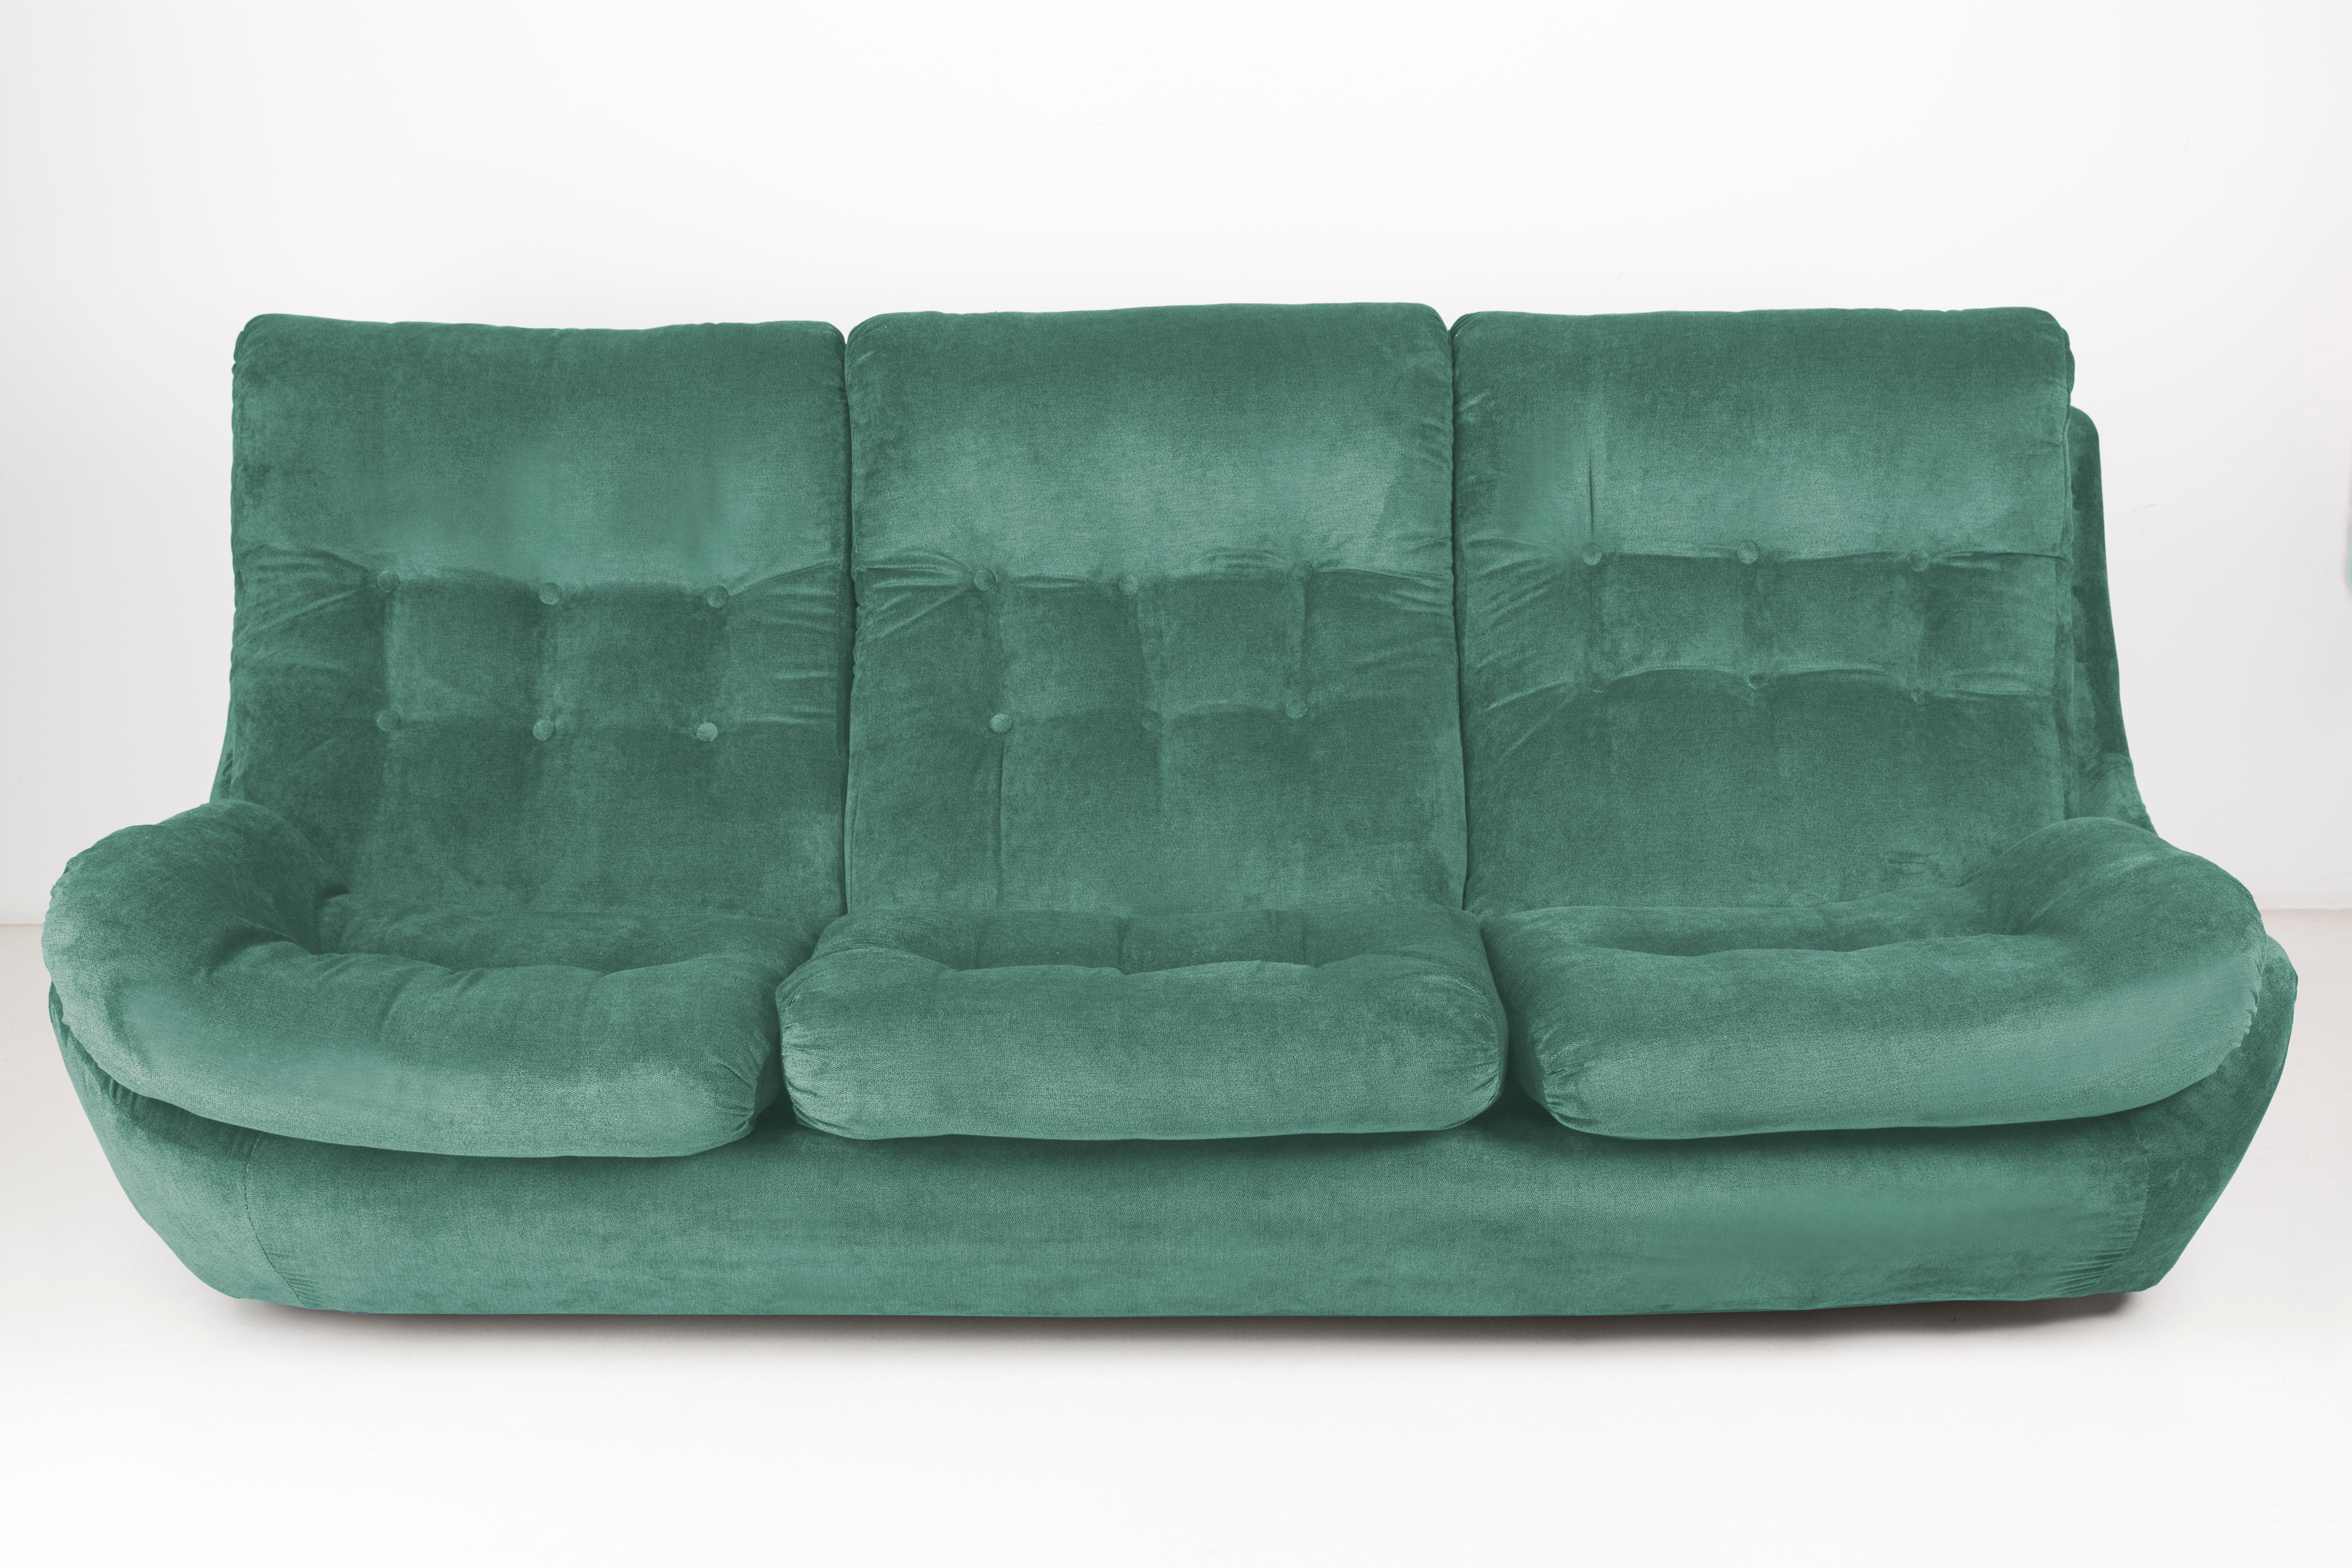 Atlantis sofa from the 1960s, produced in Czech Republic - at the moment they are unique. Due to their dimensions, they perfectly fits apartments providing comfort and beautiful decoration. Covered with high-quality velvet fabric, a space-saving